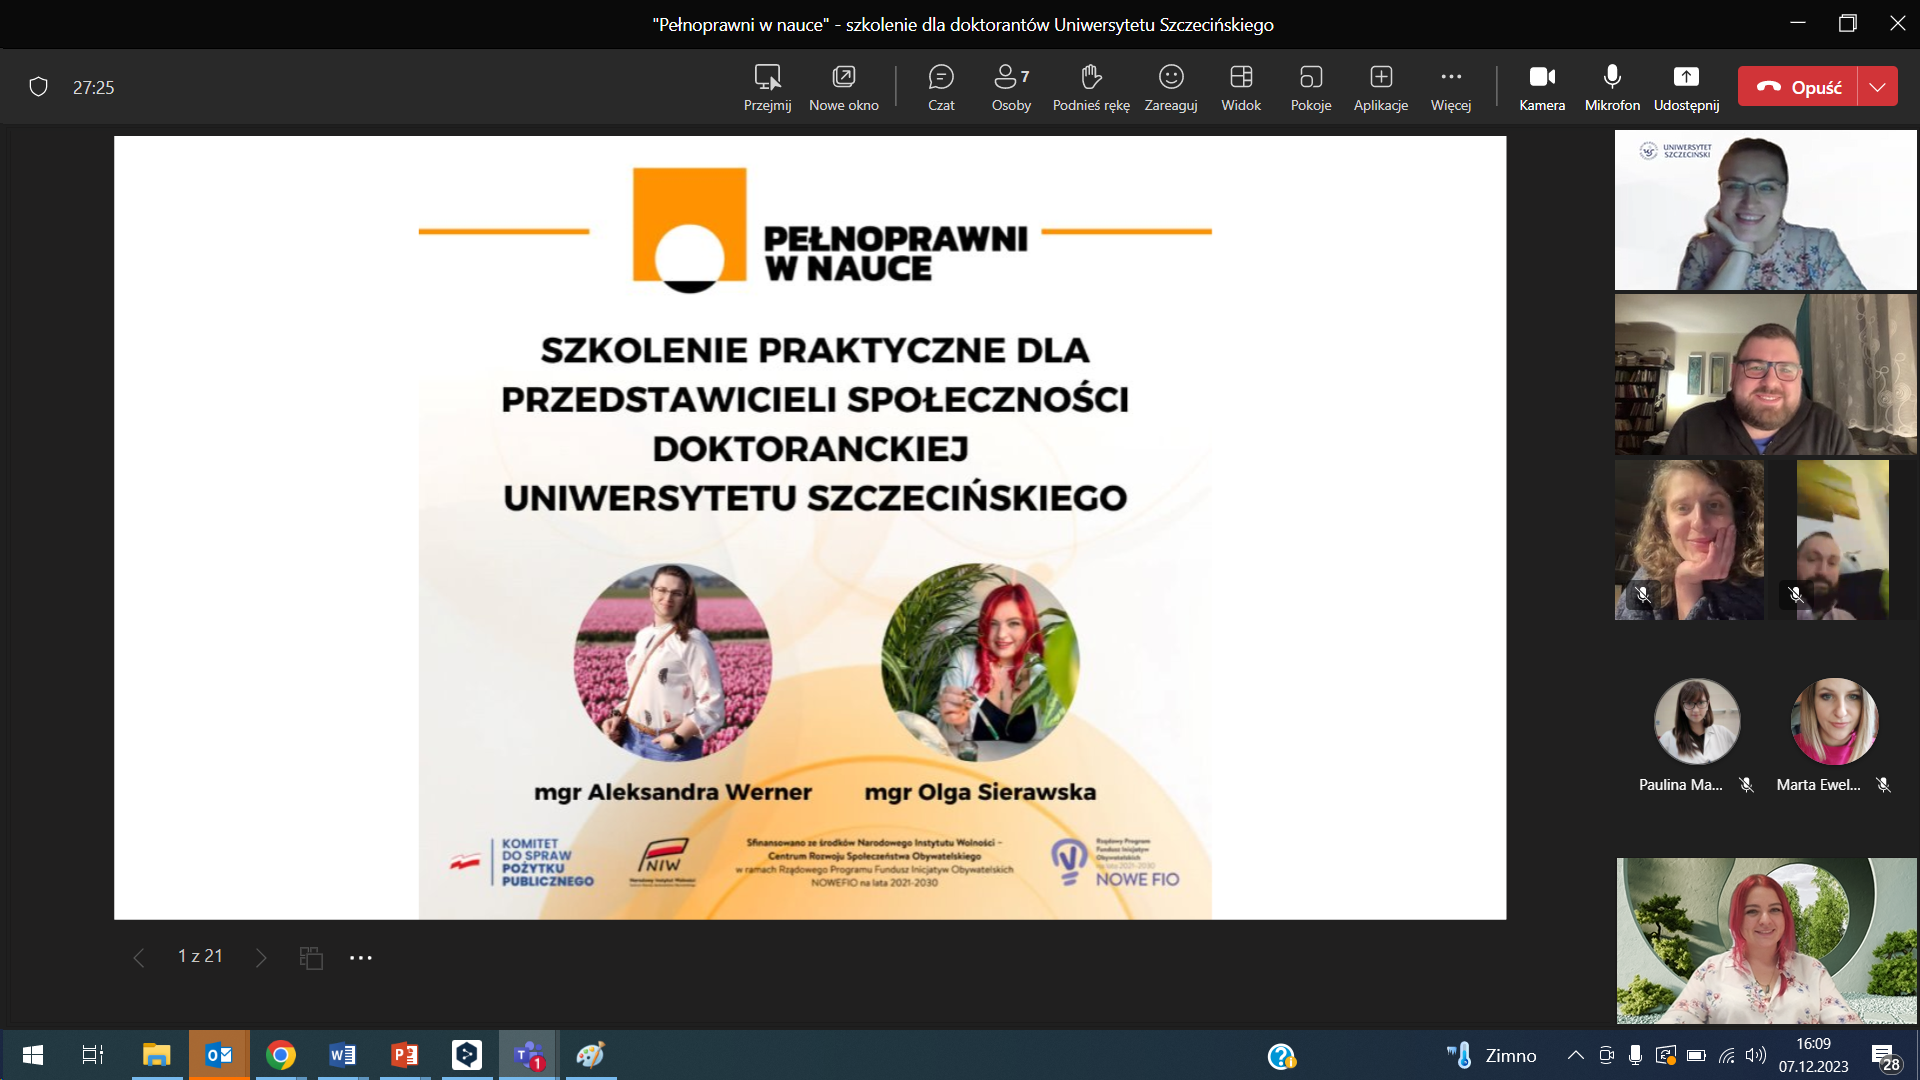 Training sessions for PhD candidates at the University of Szczecin as part of the ‘Pełnoprawni w nauce’ project